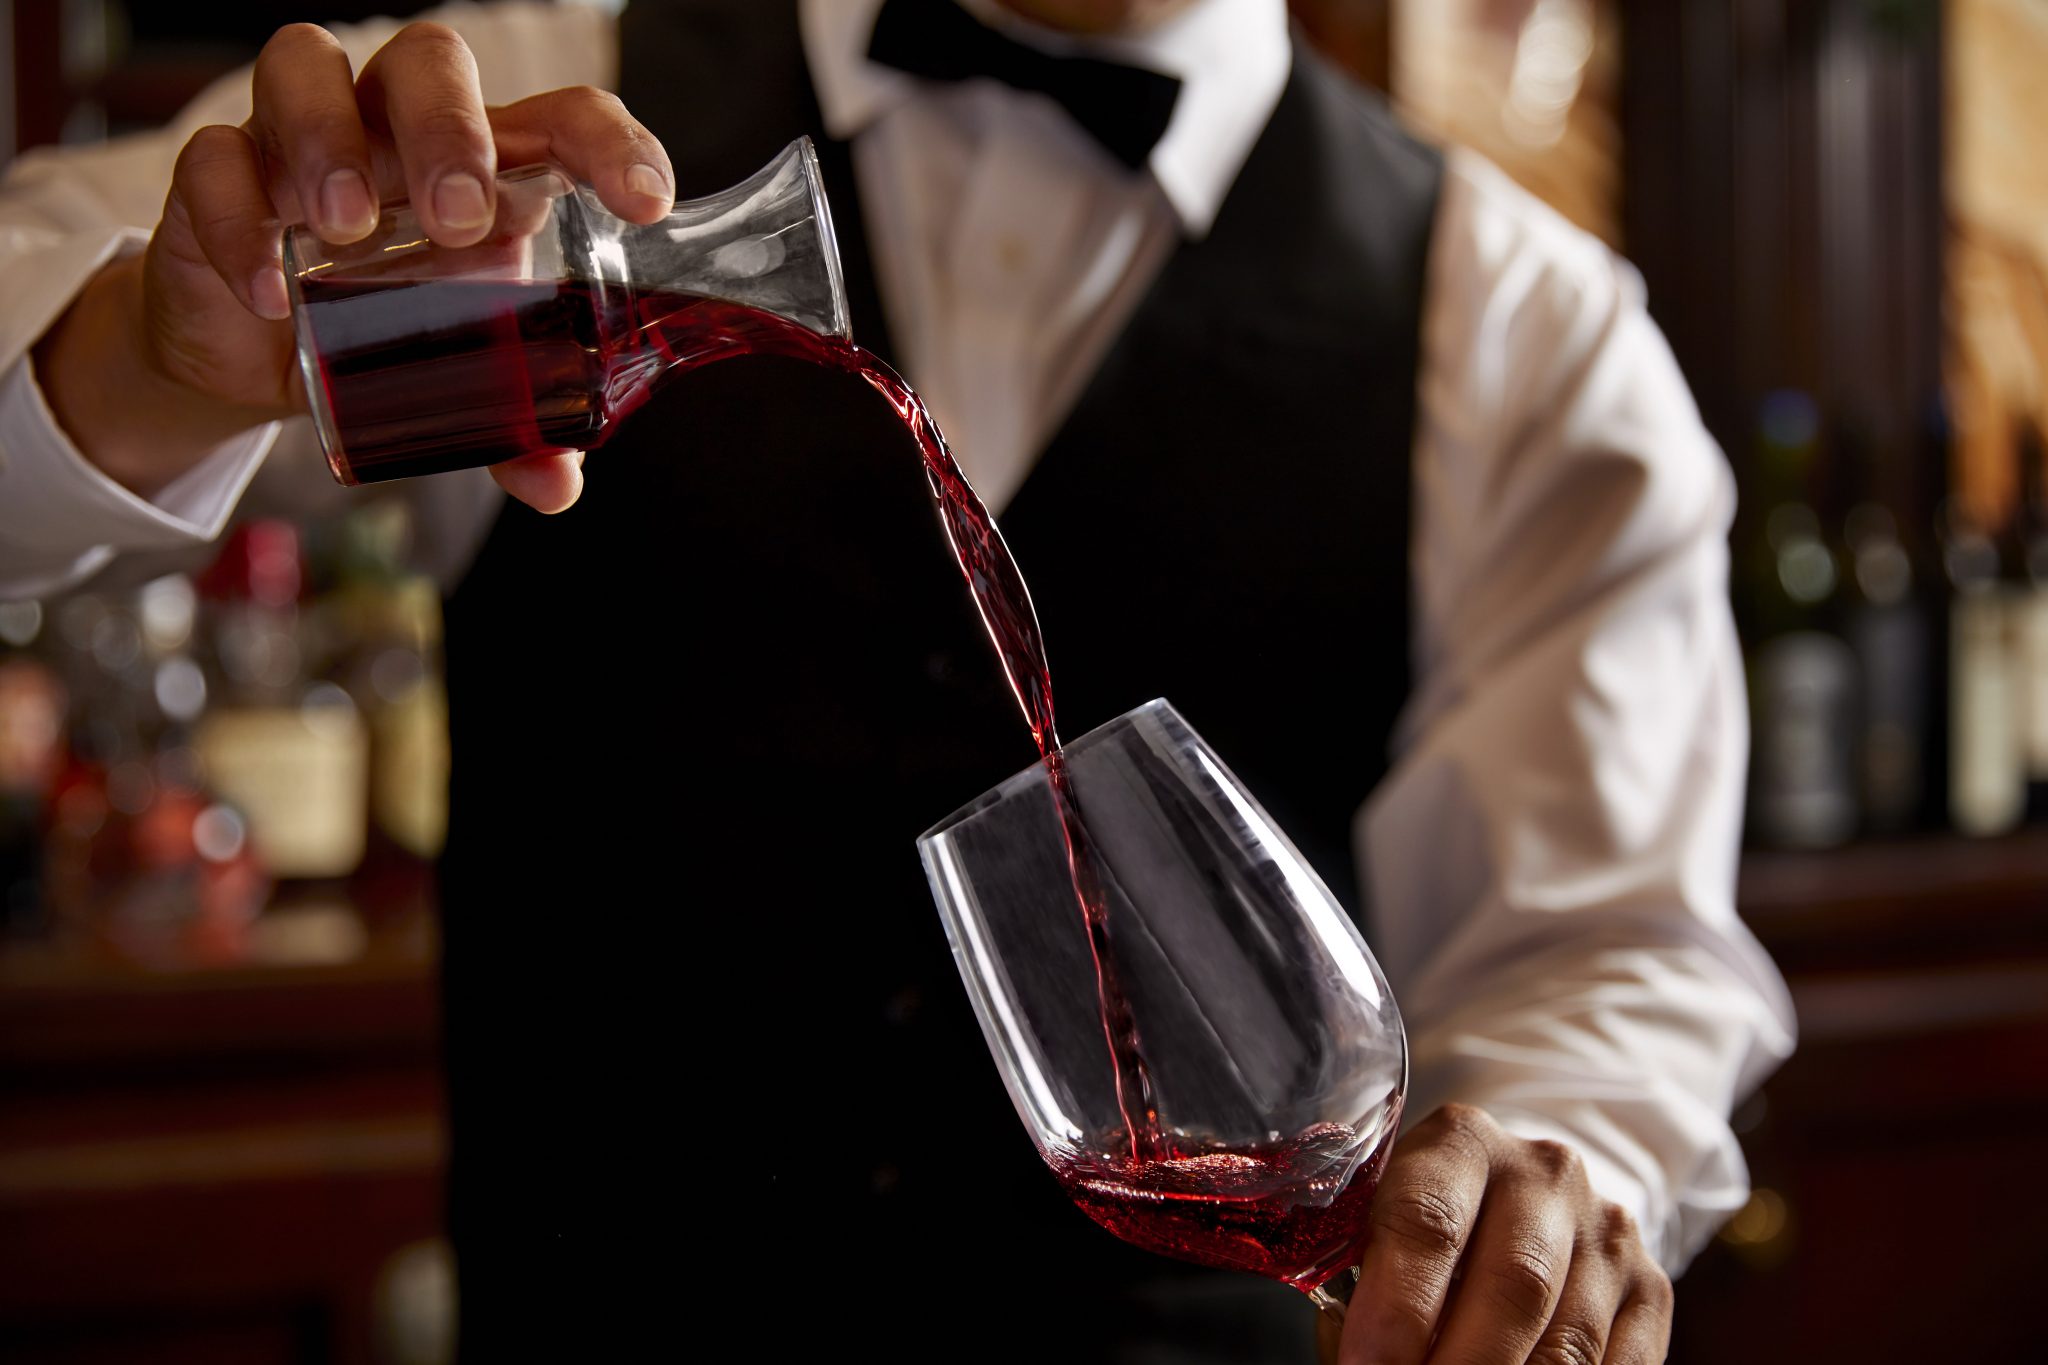 A bartender wearing a vest and bowtie pouring red wine from a carafe into a glass